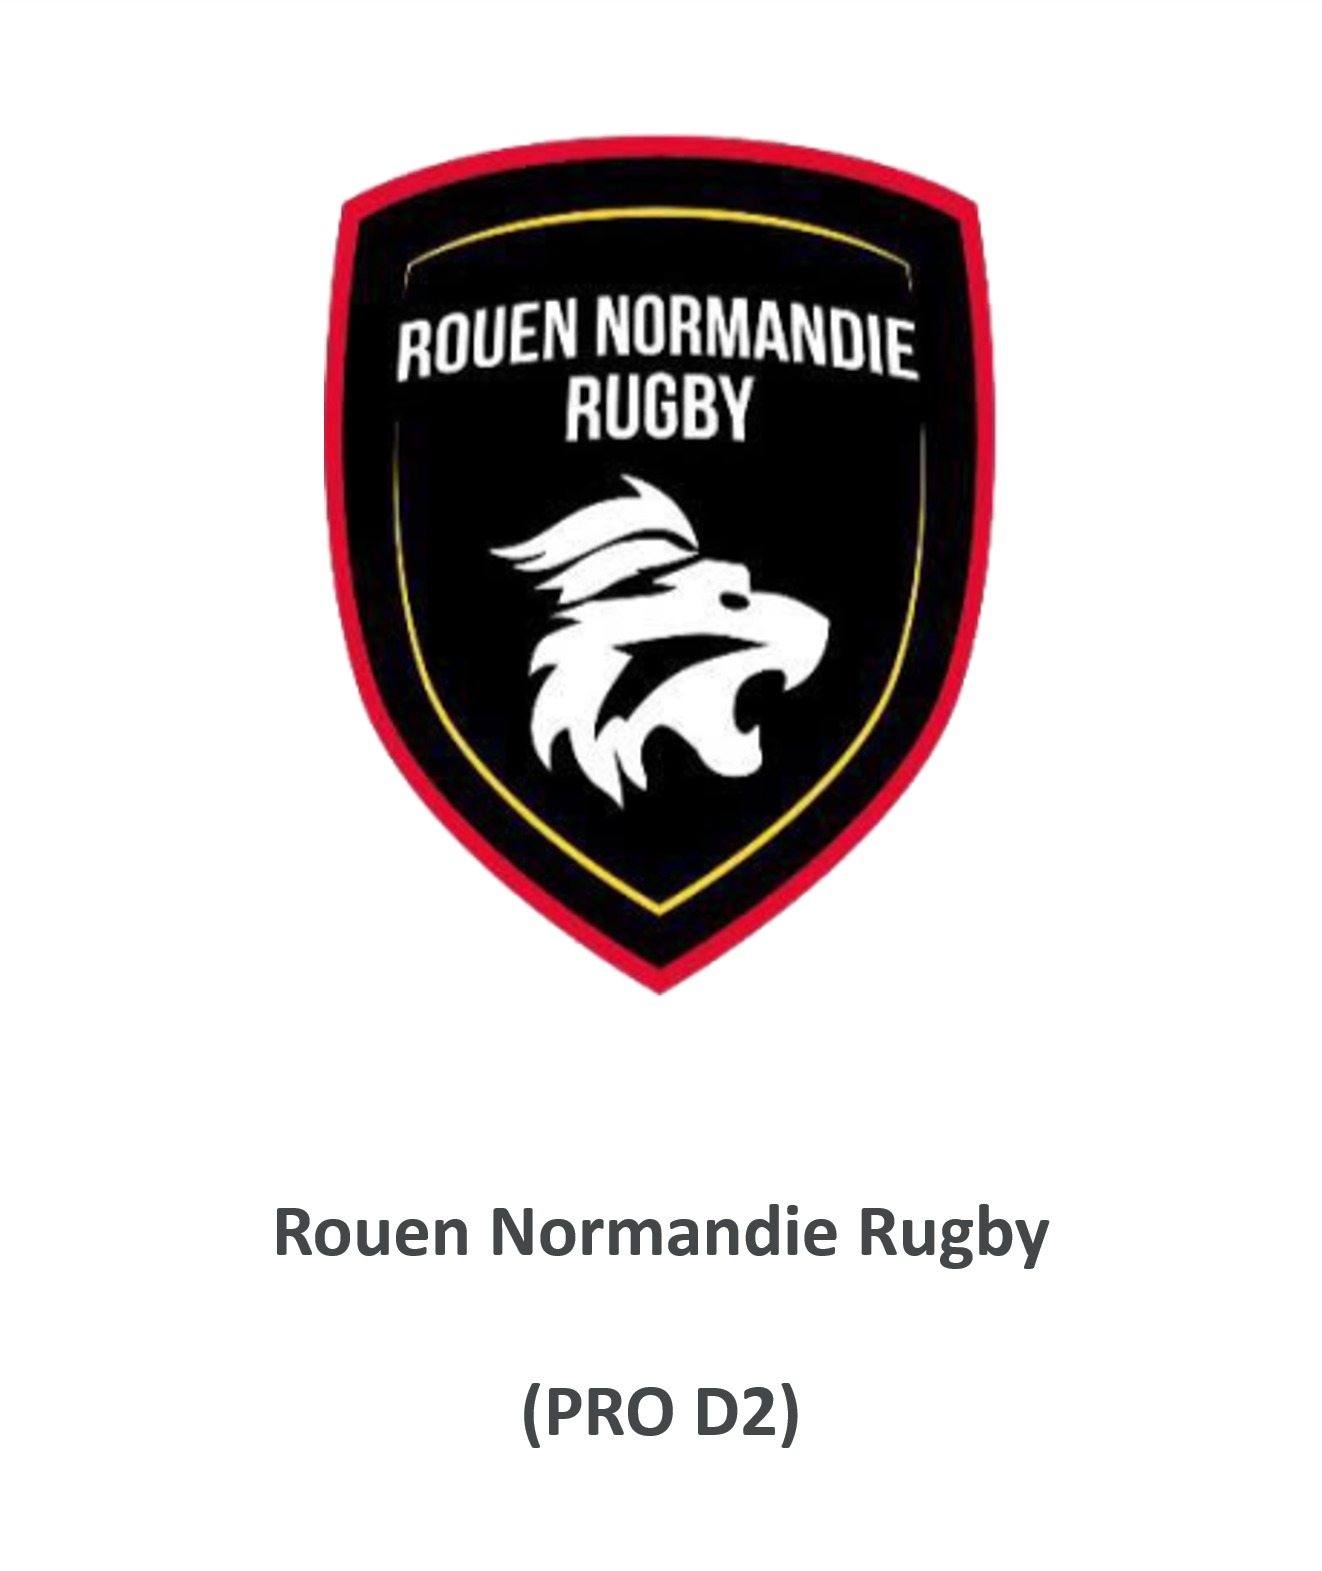 https://mclloyd.com/wp-content/uploads/2021/05/Rouen-Normandie-Rugby-9.png